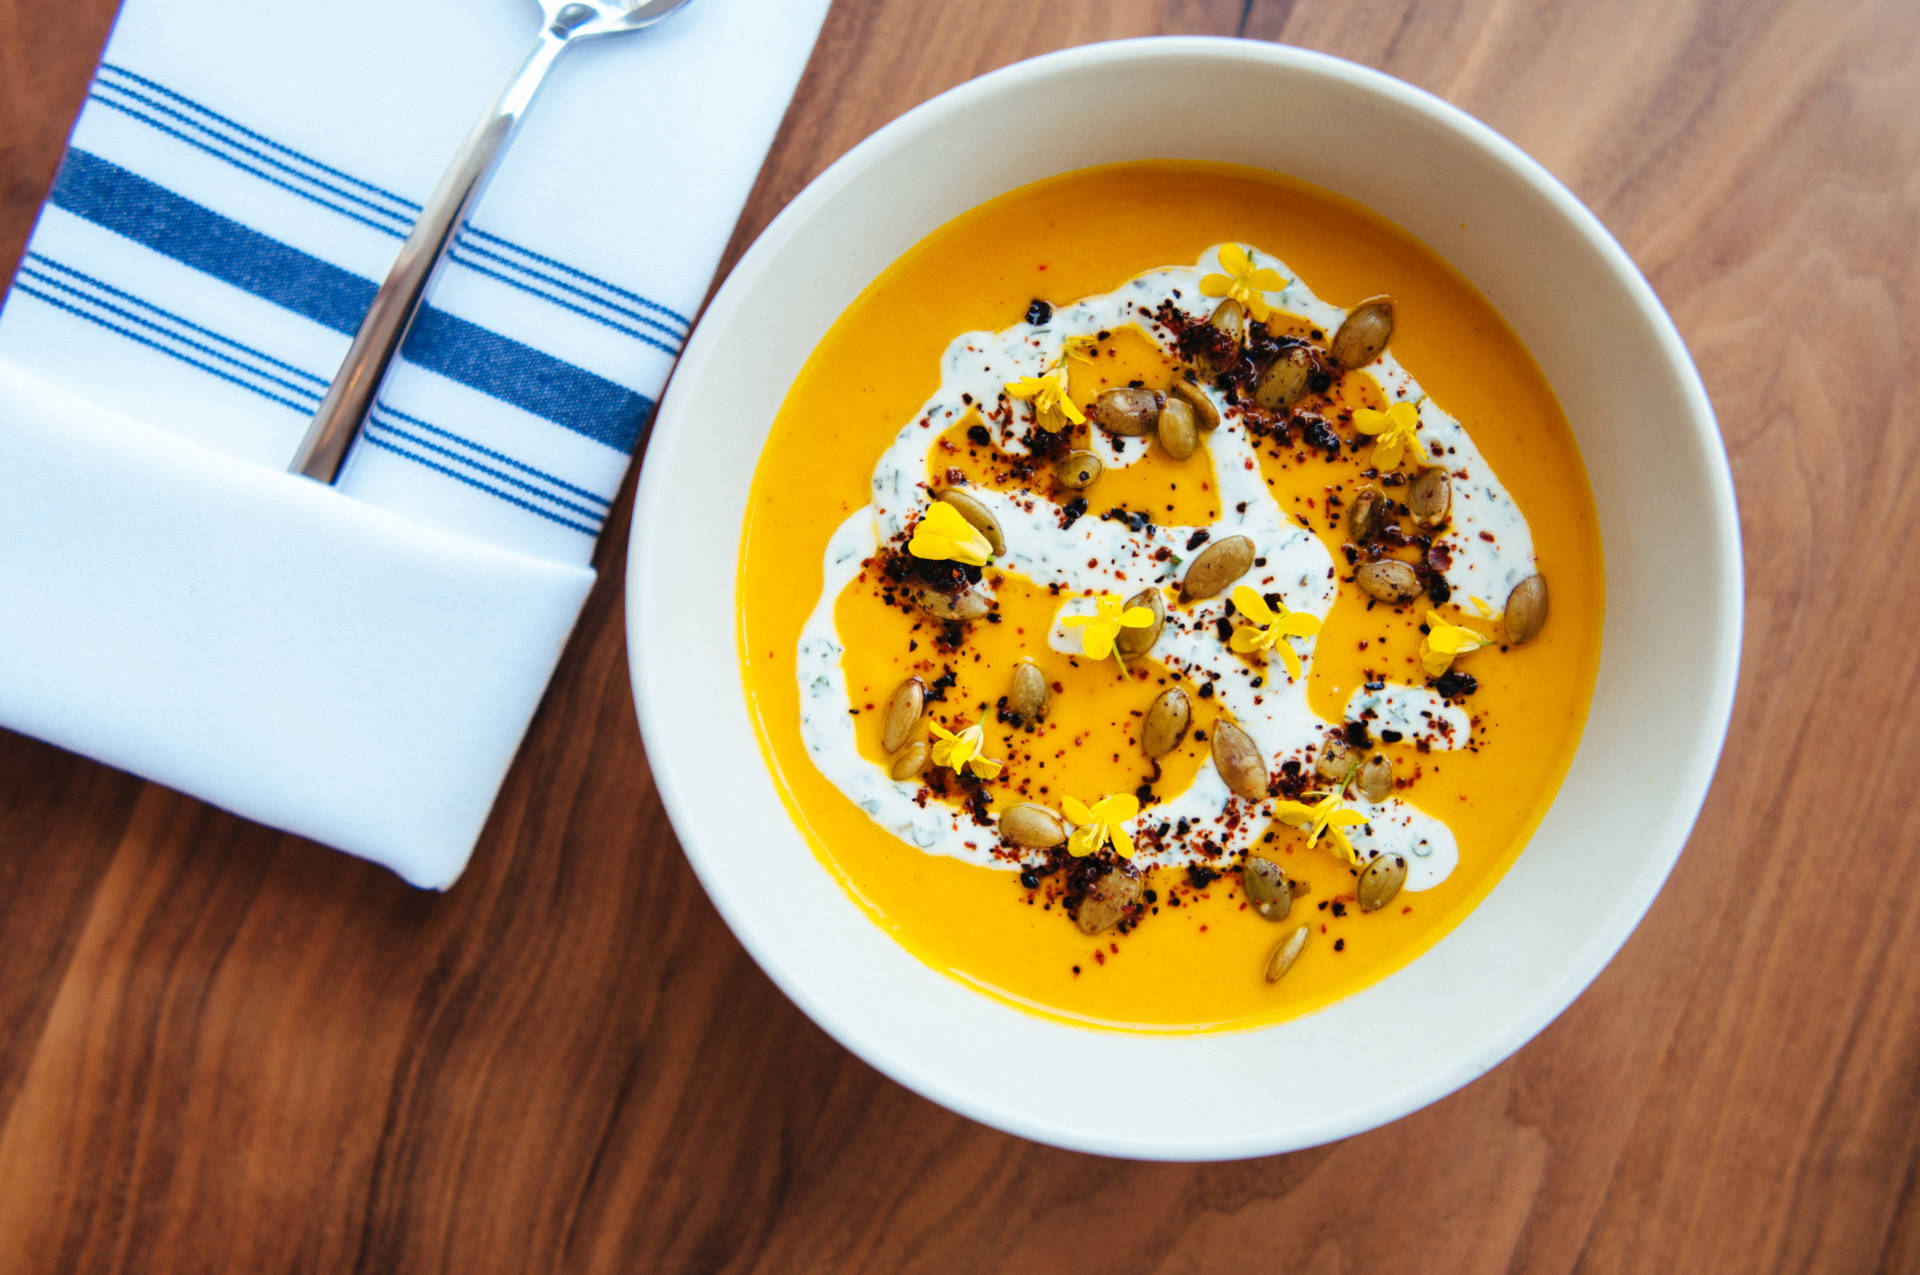 Berbere-spiced carrot soup at Pearl.